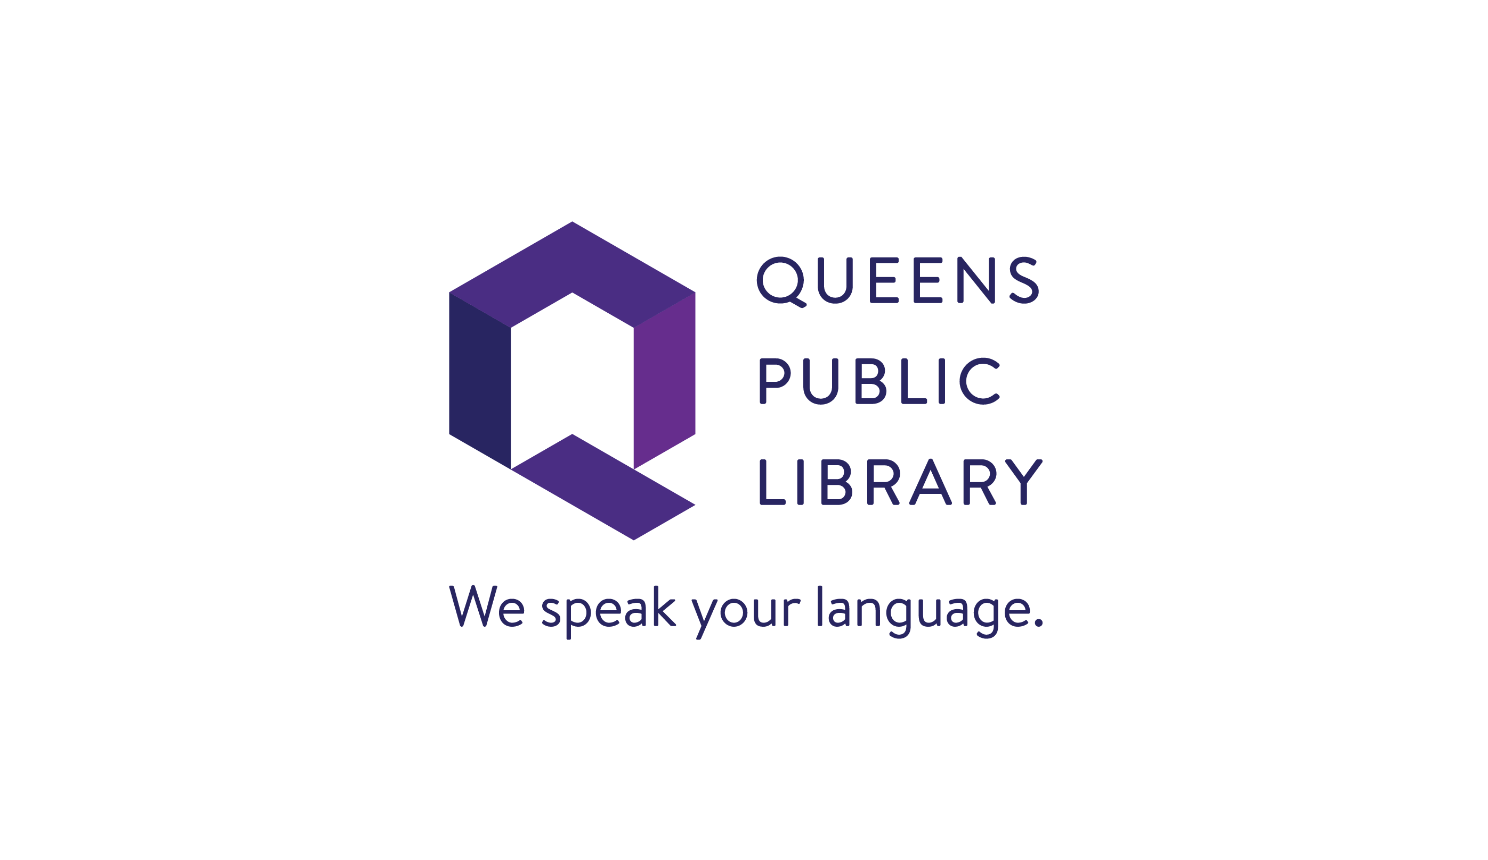 Logo of the new Queens Public Library